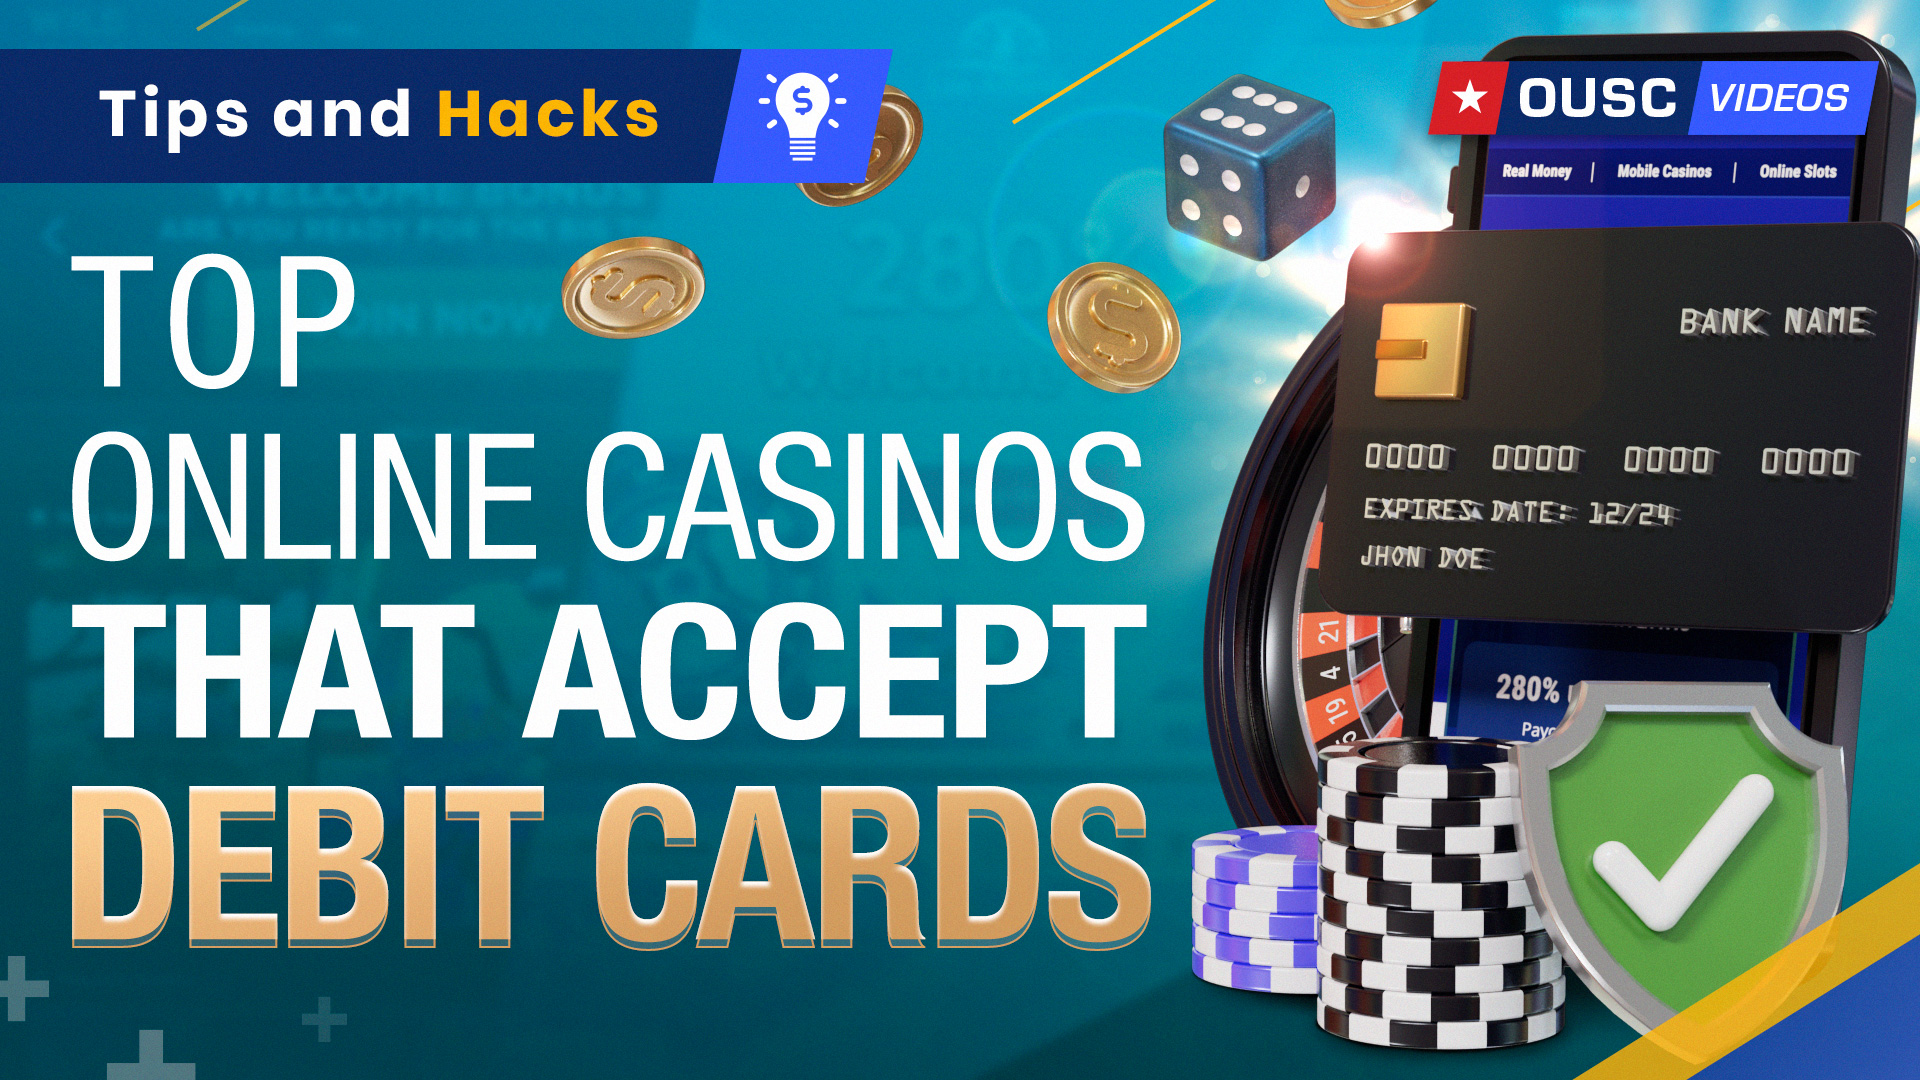 Can I Use My Debit Card for Online Gambling?